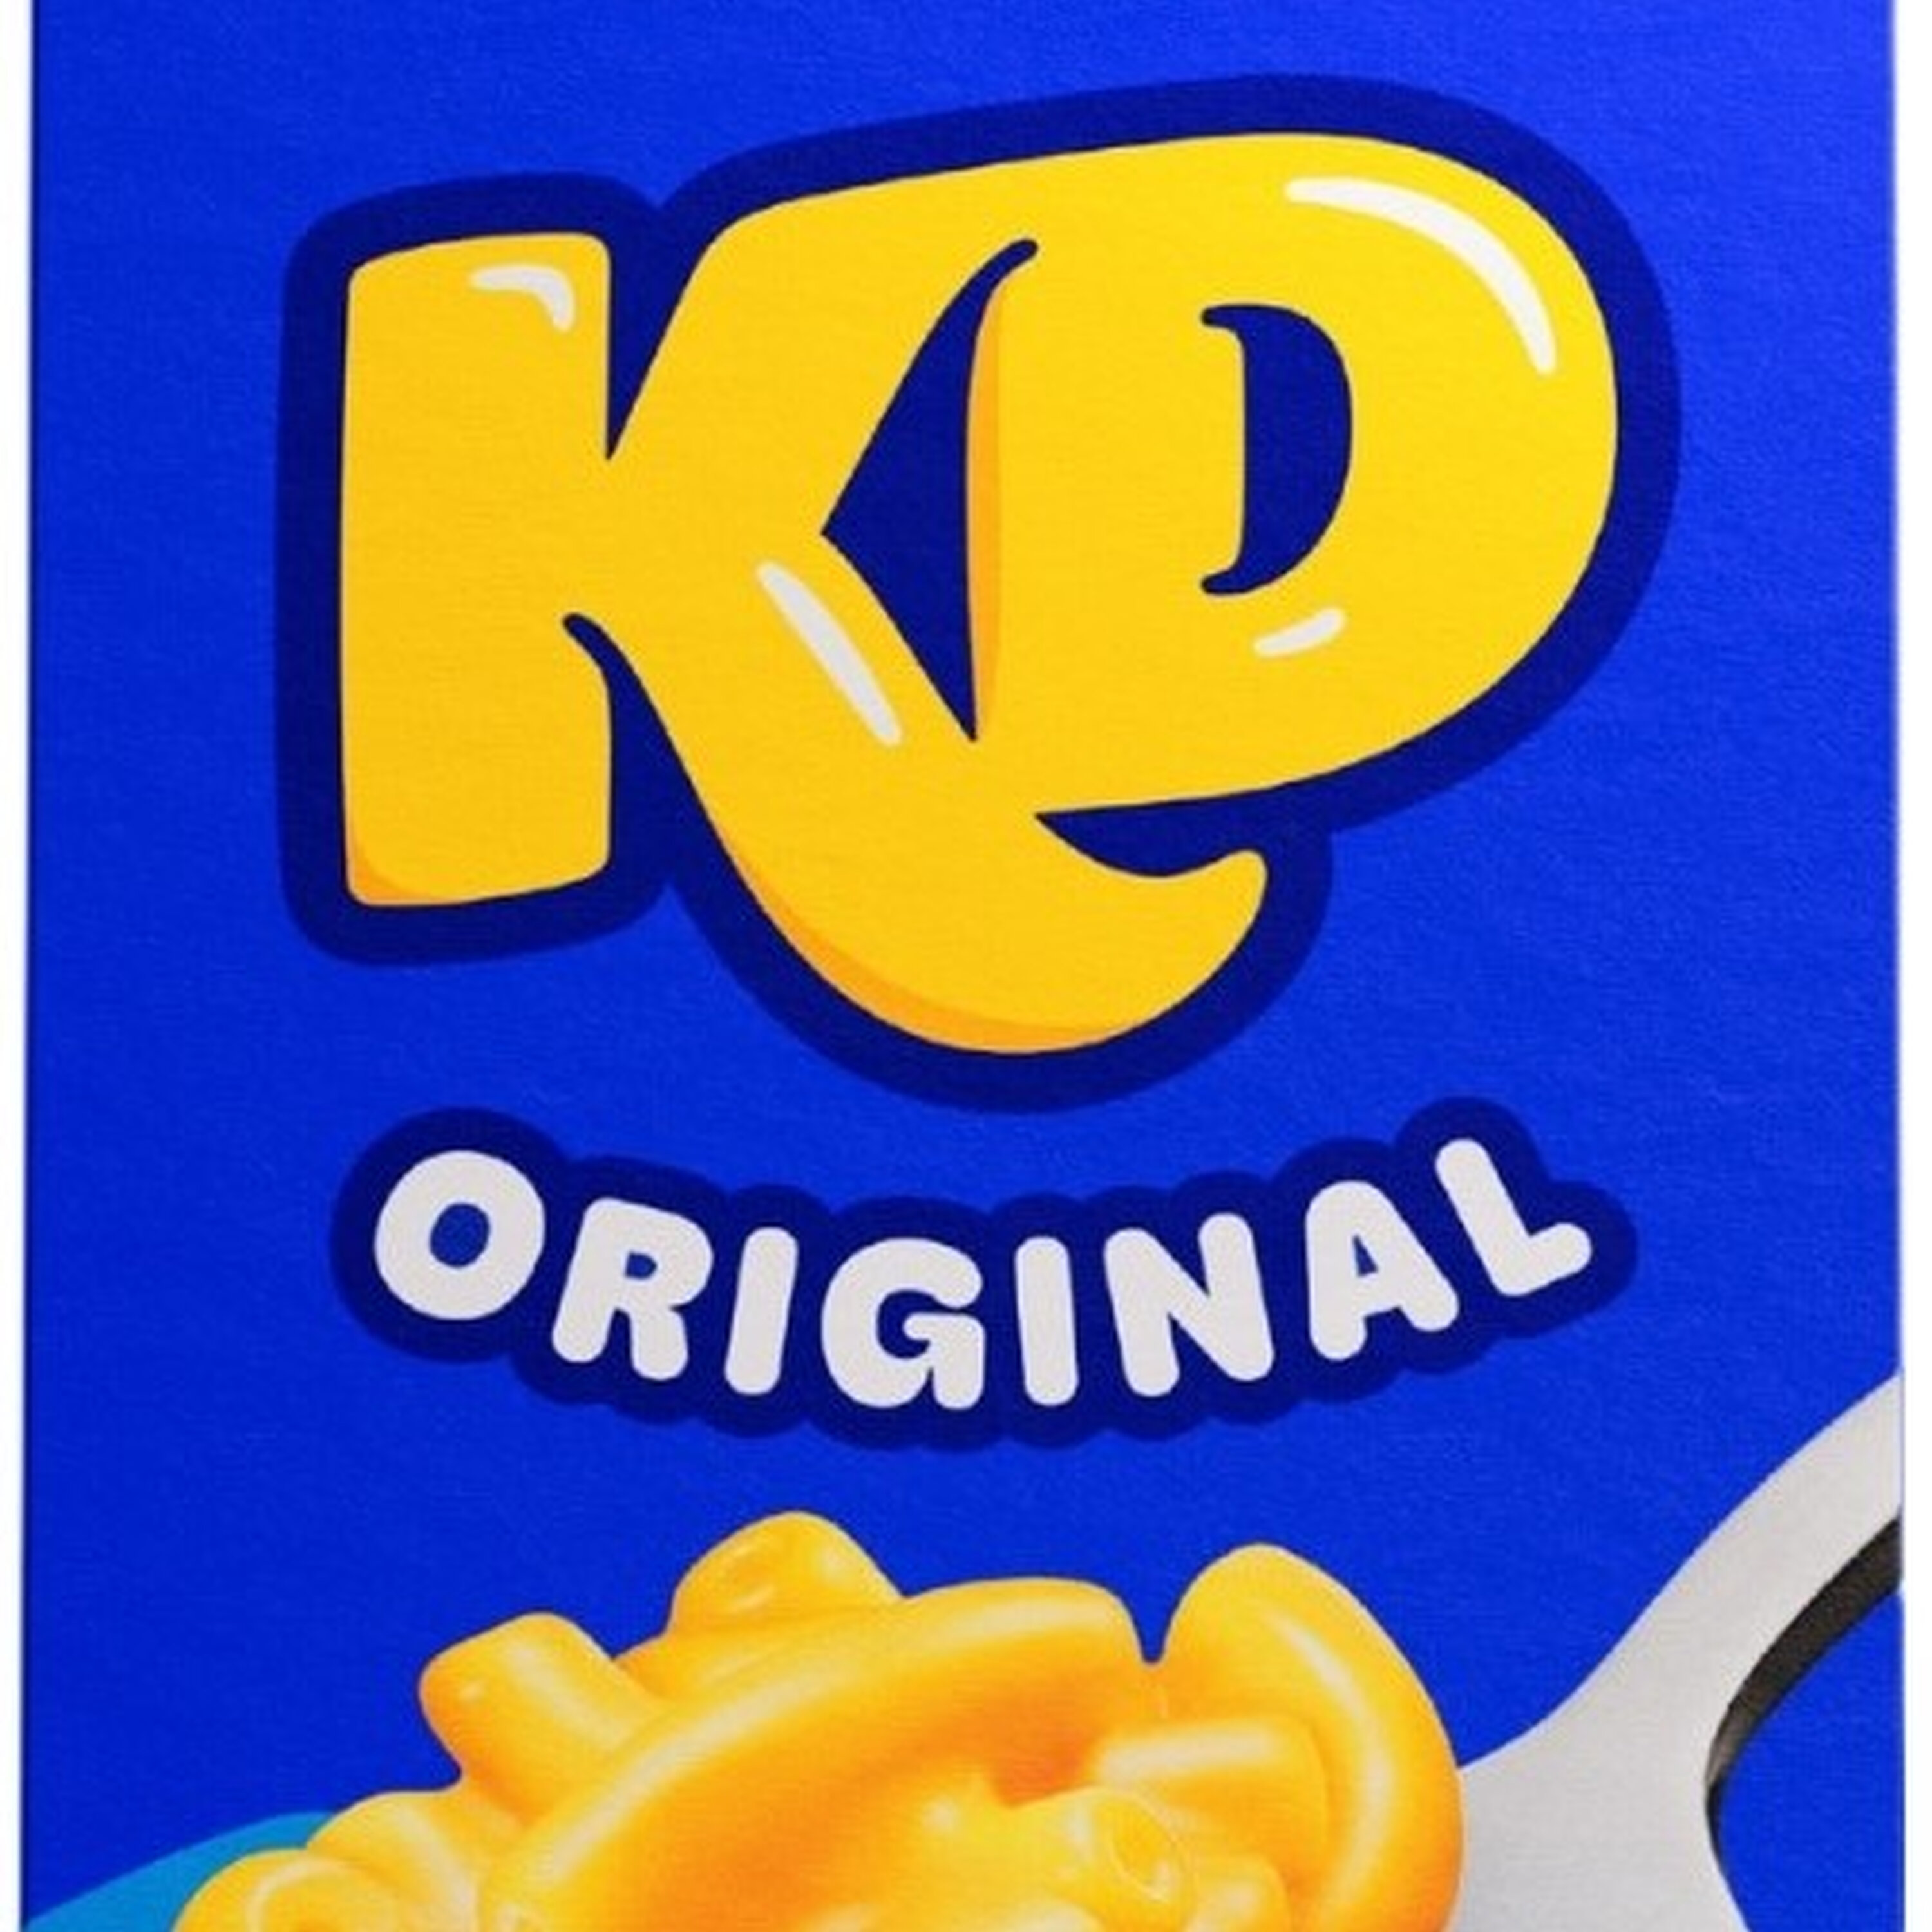 Here is the Montreal connection to Kraft Dinner being sold in Canada